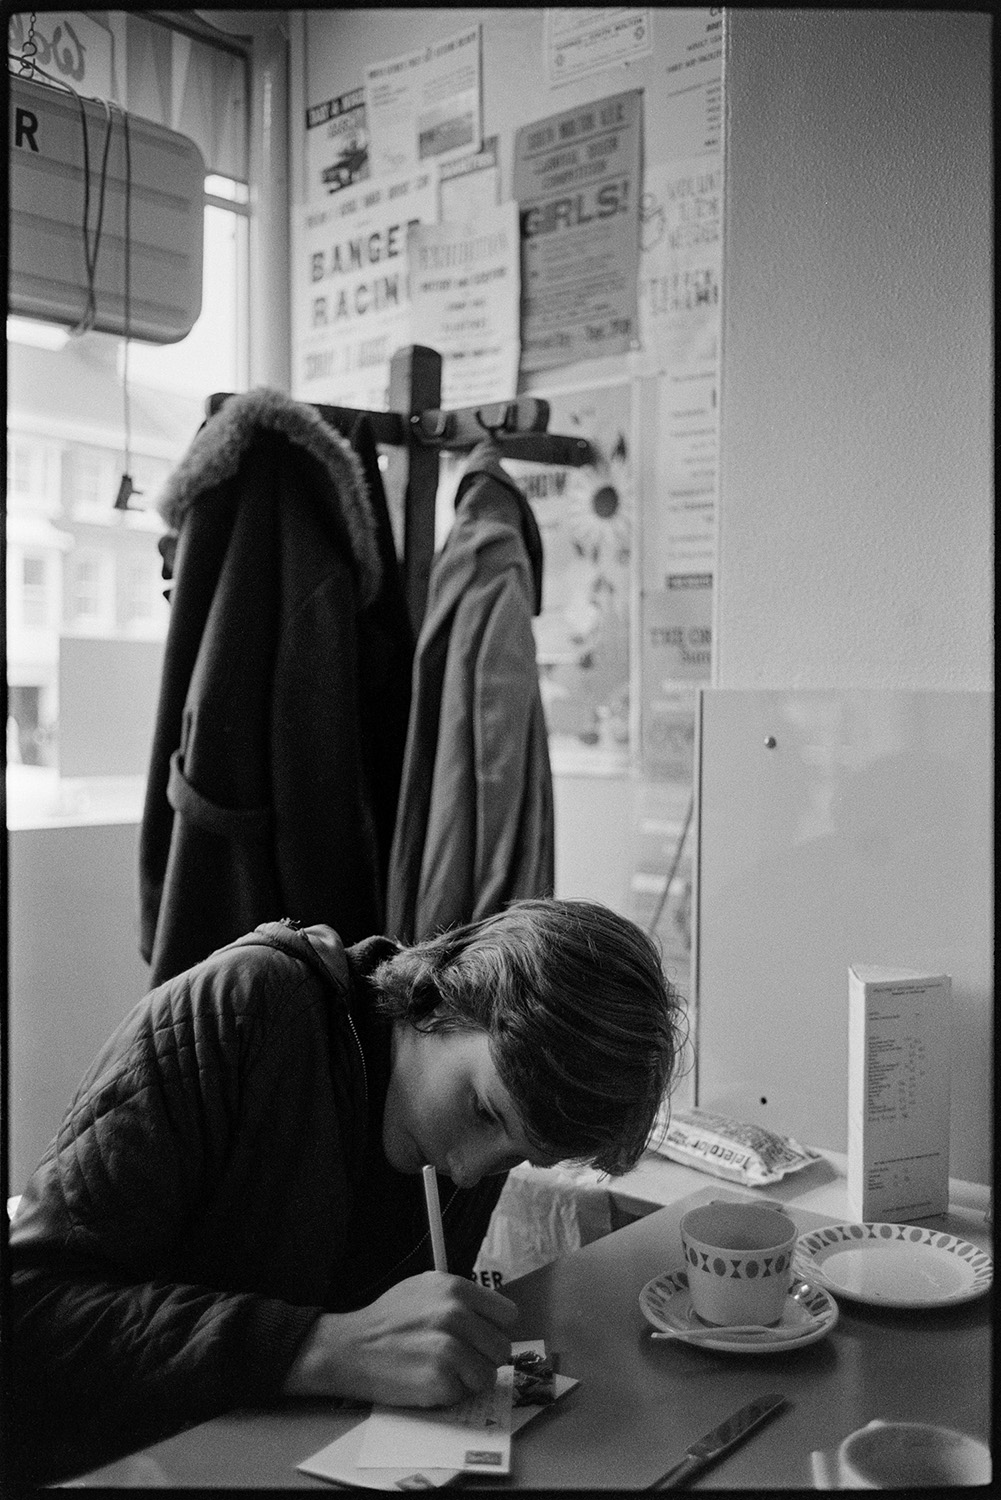 A teenager in a café writing a post card. A coat stand and posters are visible in the background.